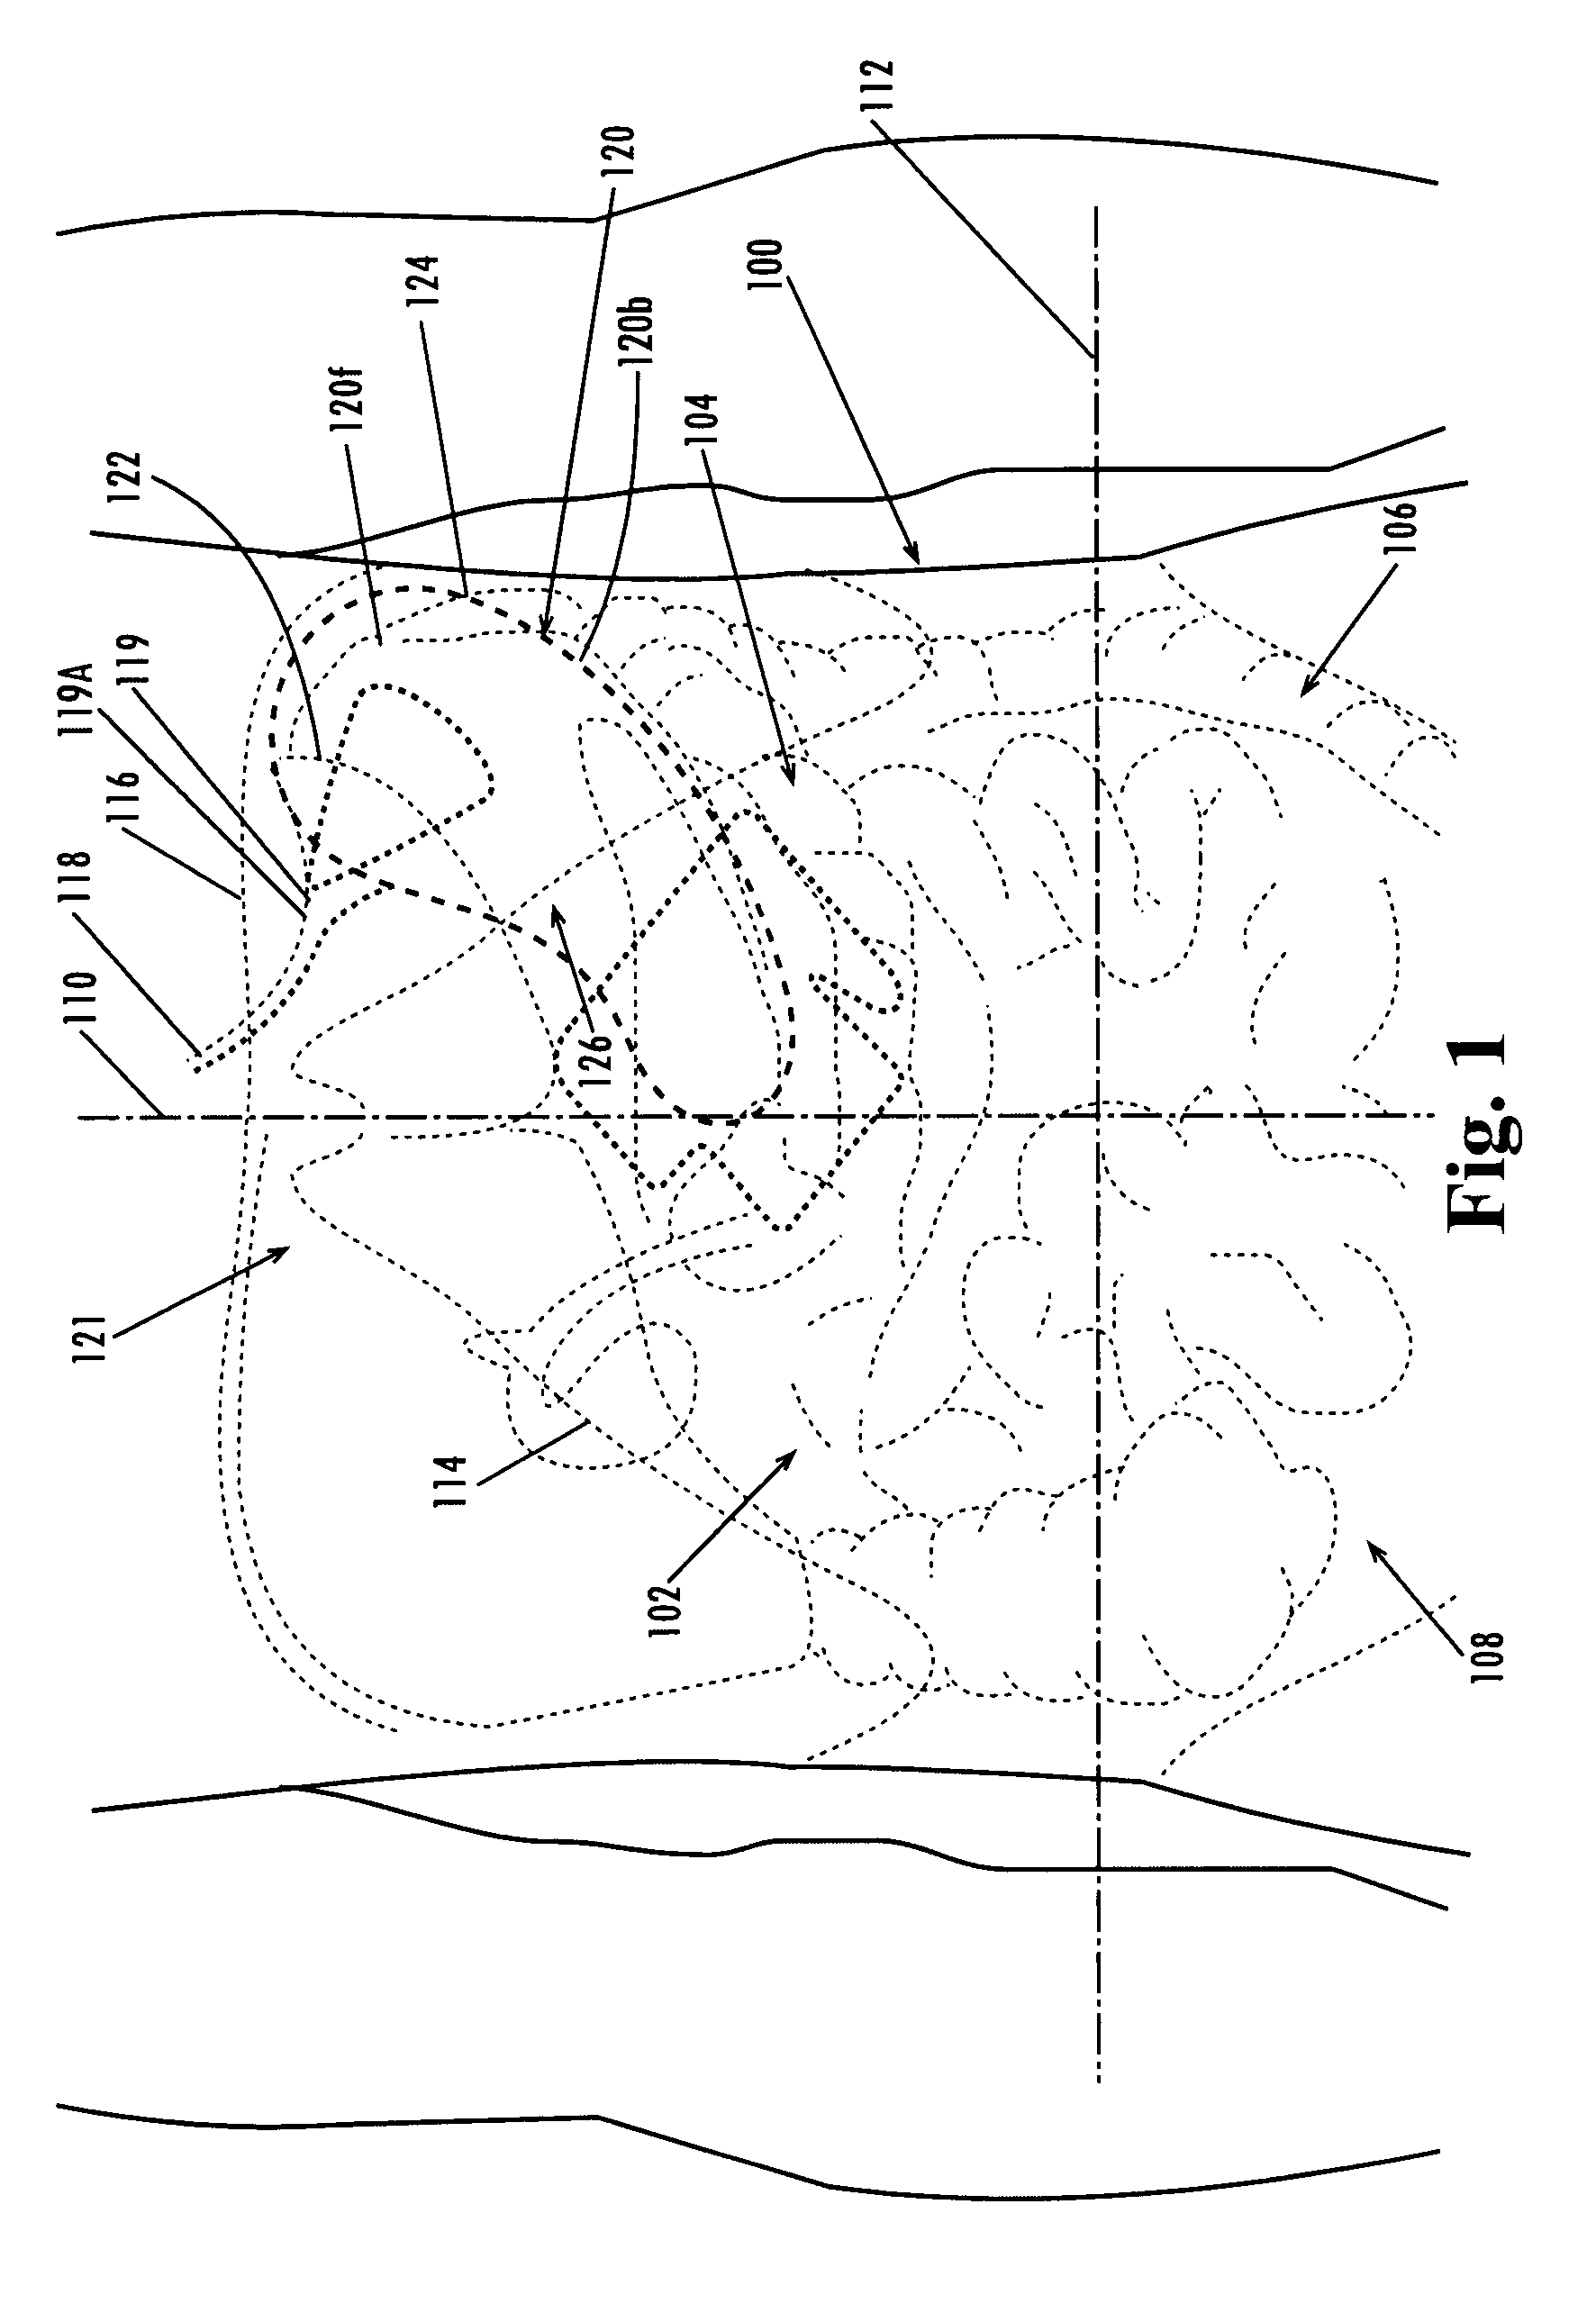 Devices and methods for treatment of obesity